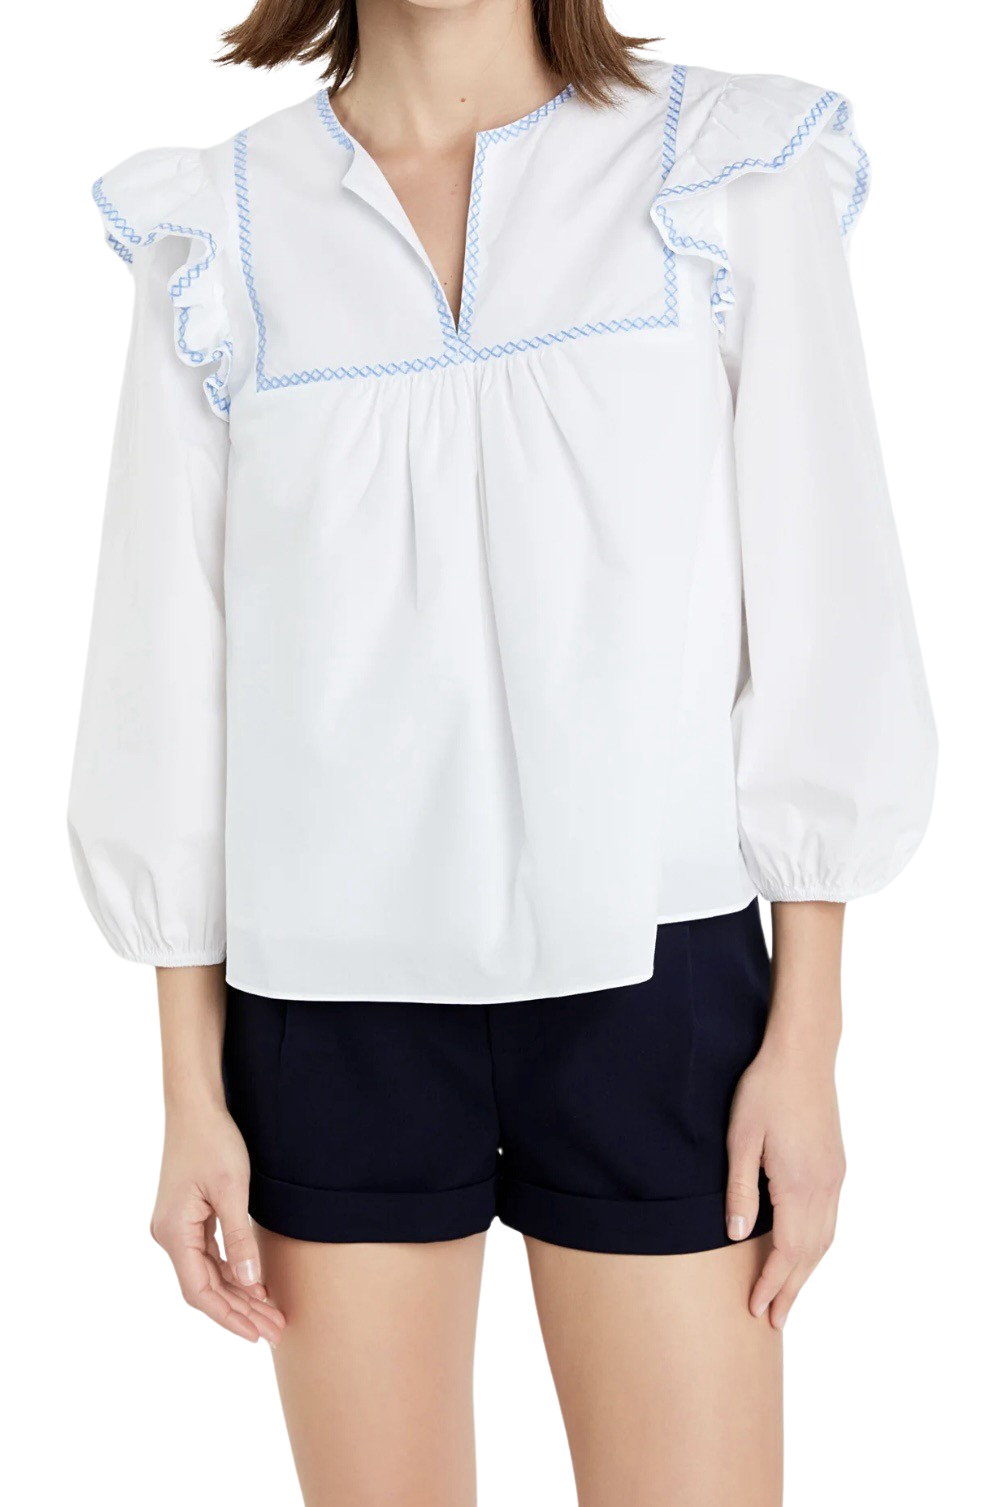 Apparel- English Factory Contrast Embroidery Detail Shirt